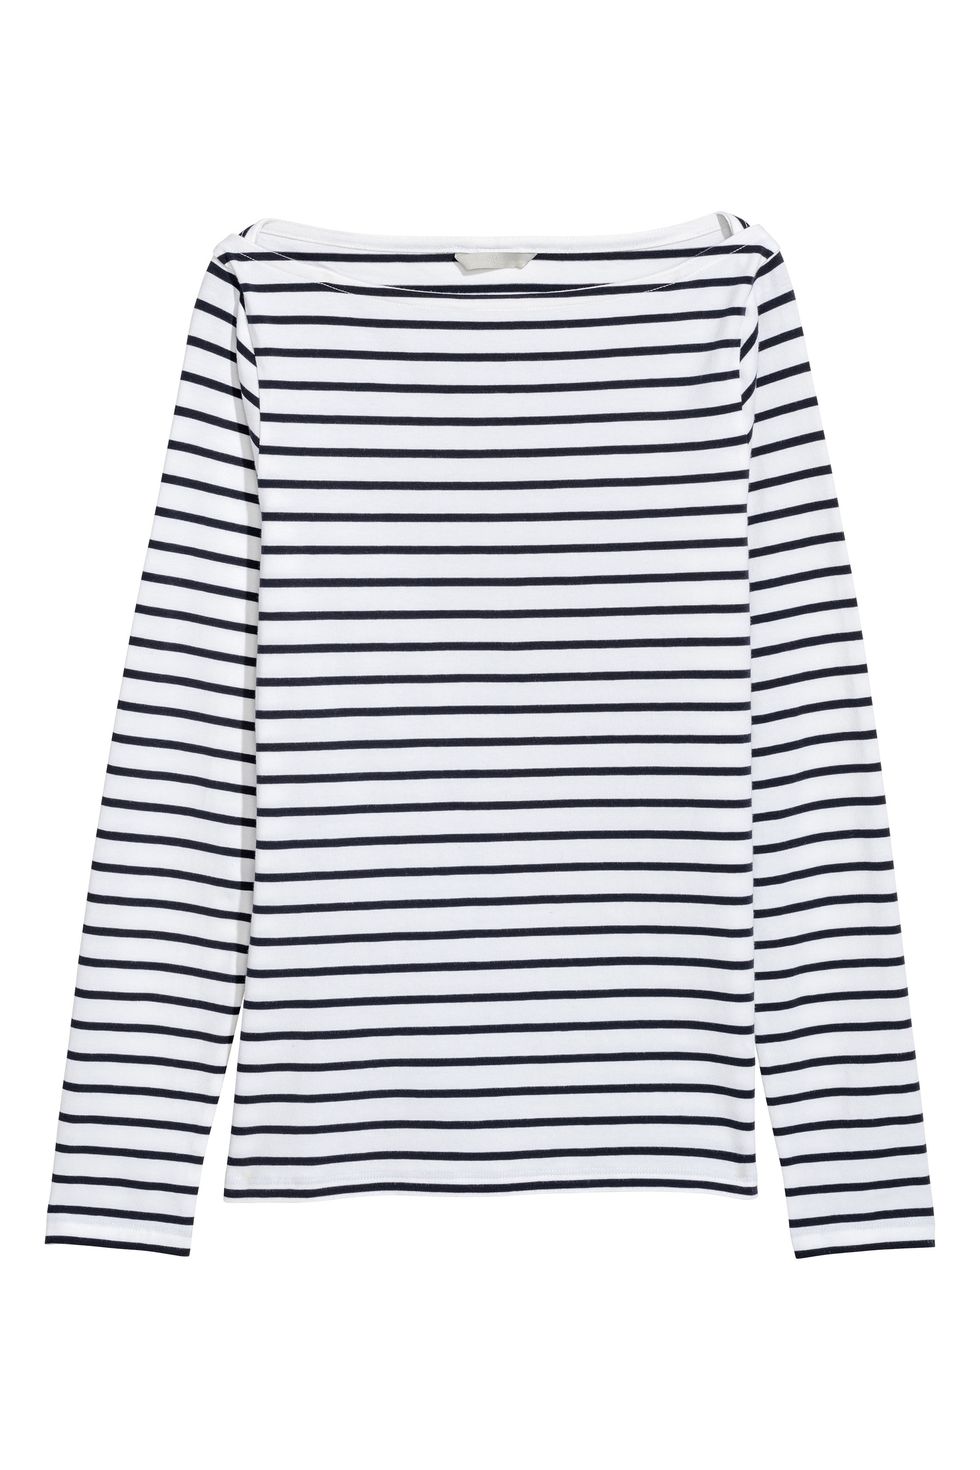 Best boat neckline pieces to buy now – Bateau necklines to wear this summer